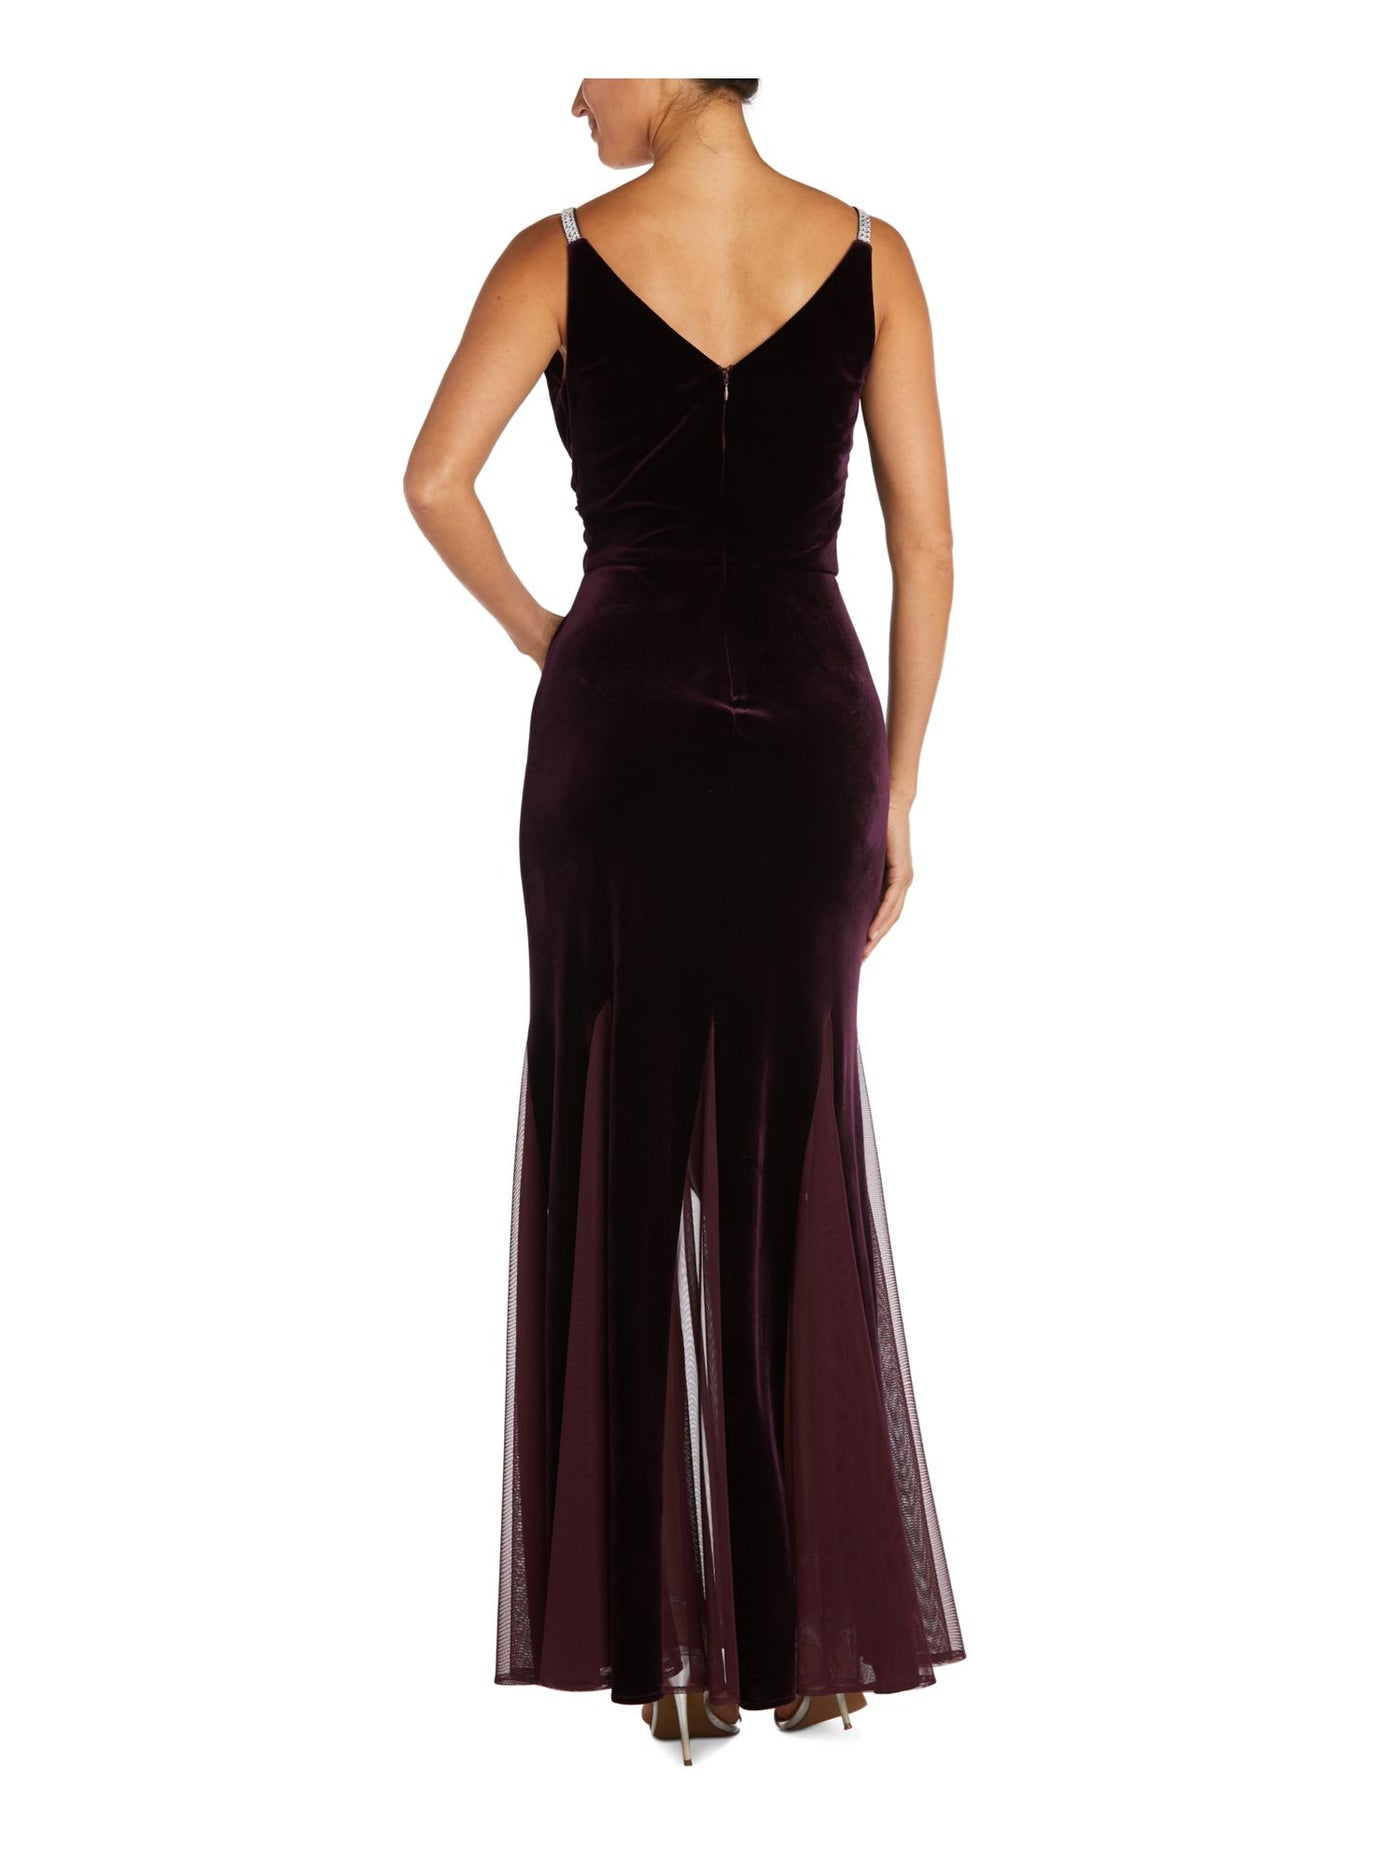 NIGHTWAY Womens Maroon Stretch Embellished Zippered Pleated Mesh Godets Sleeveless V Neck Maxi Evening Gown Dress Plus 16W